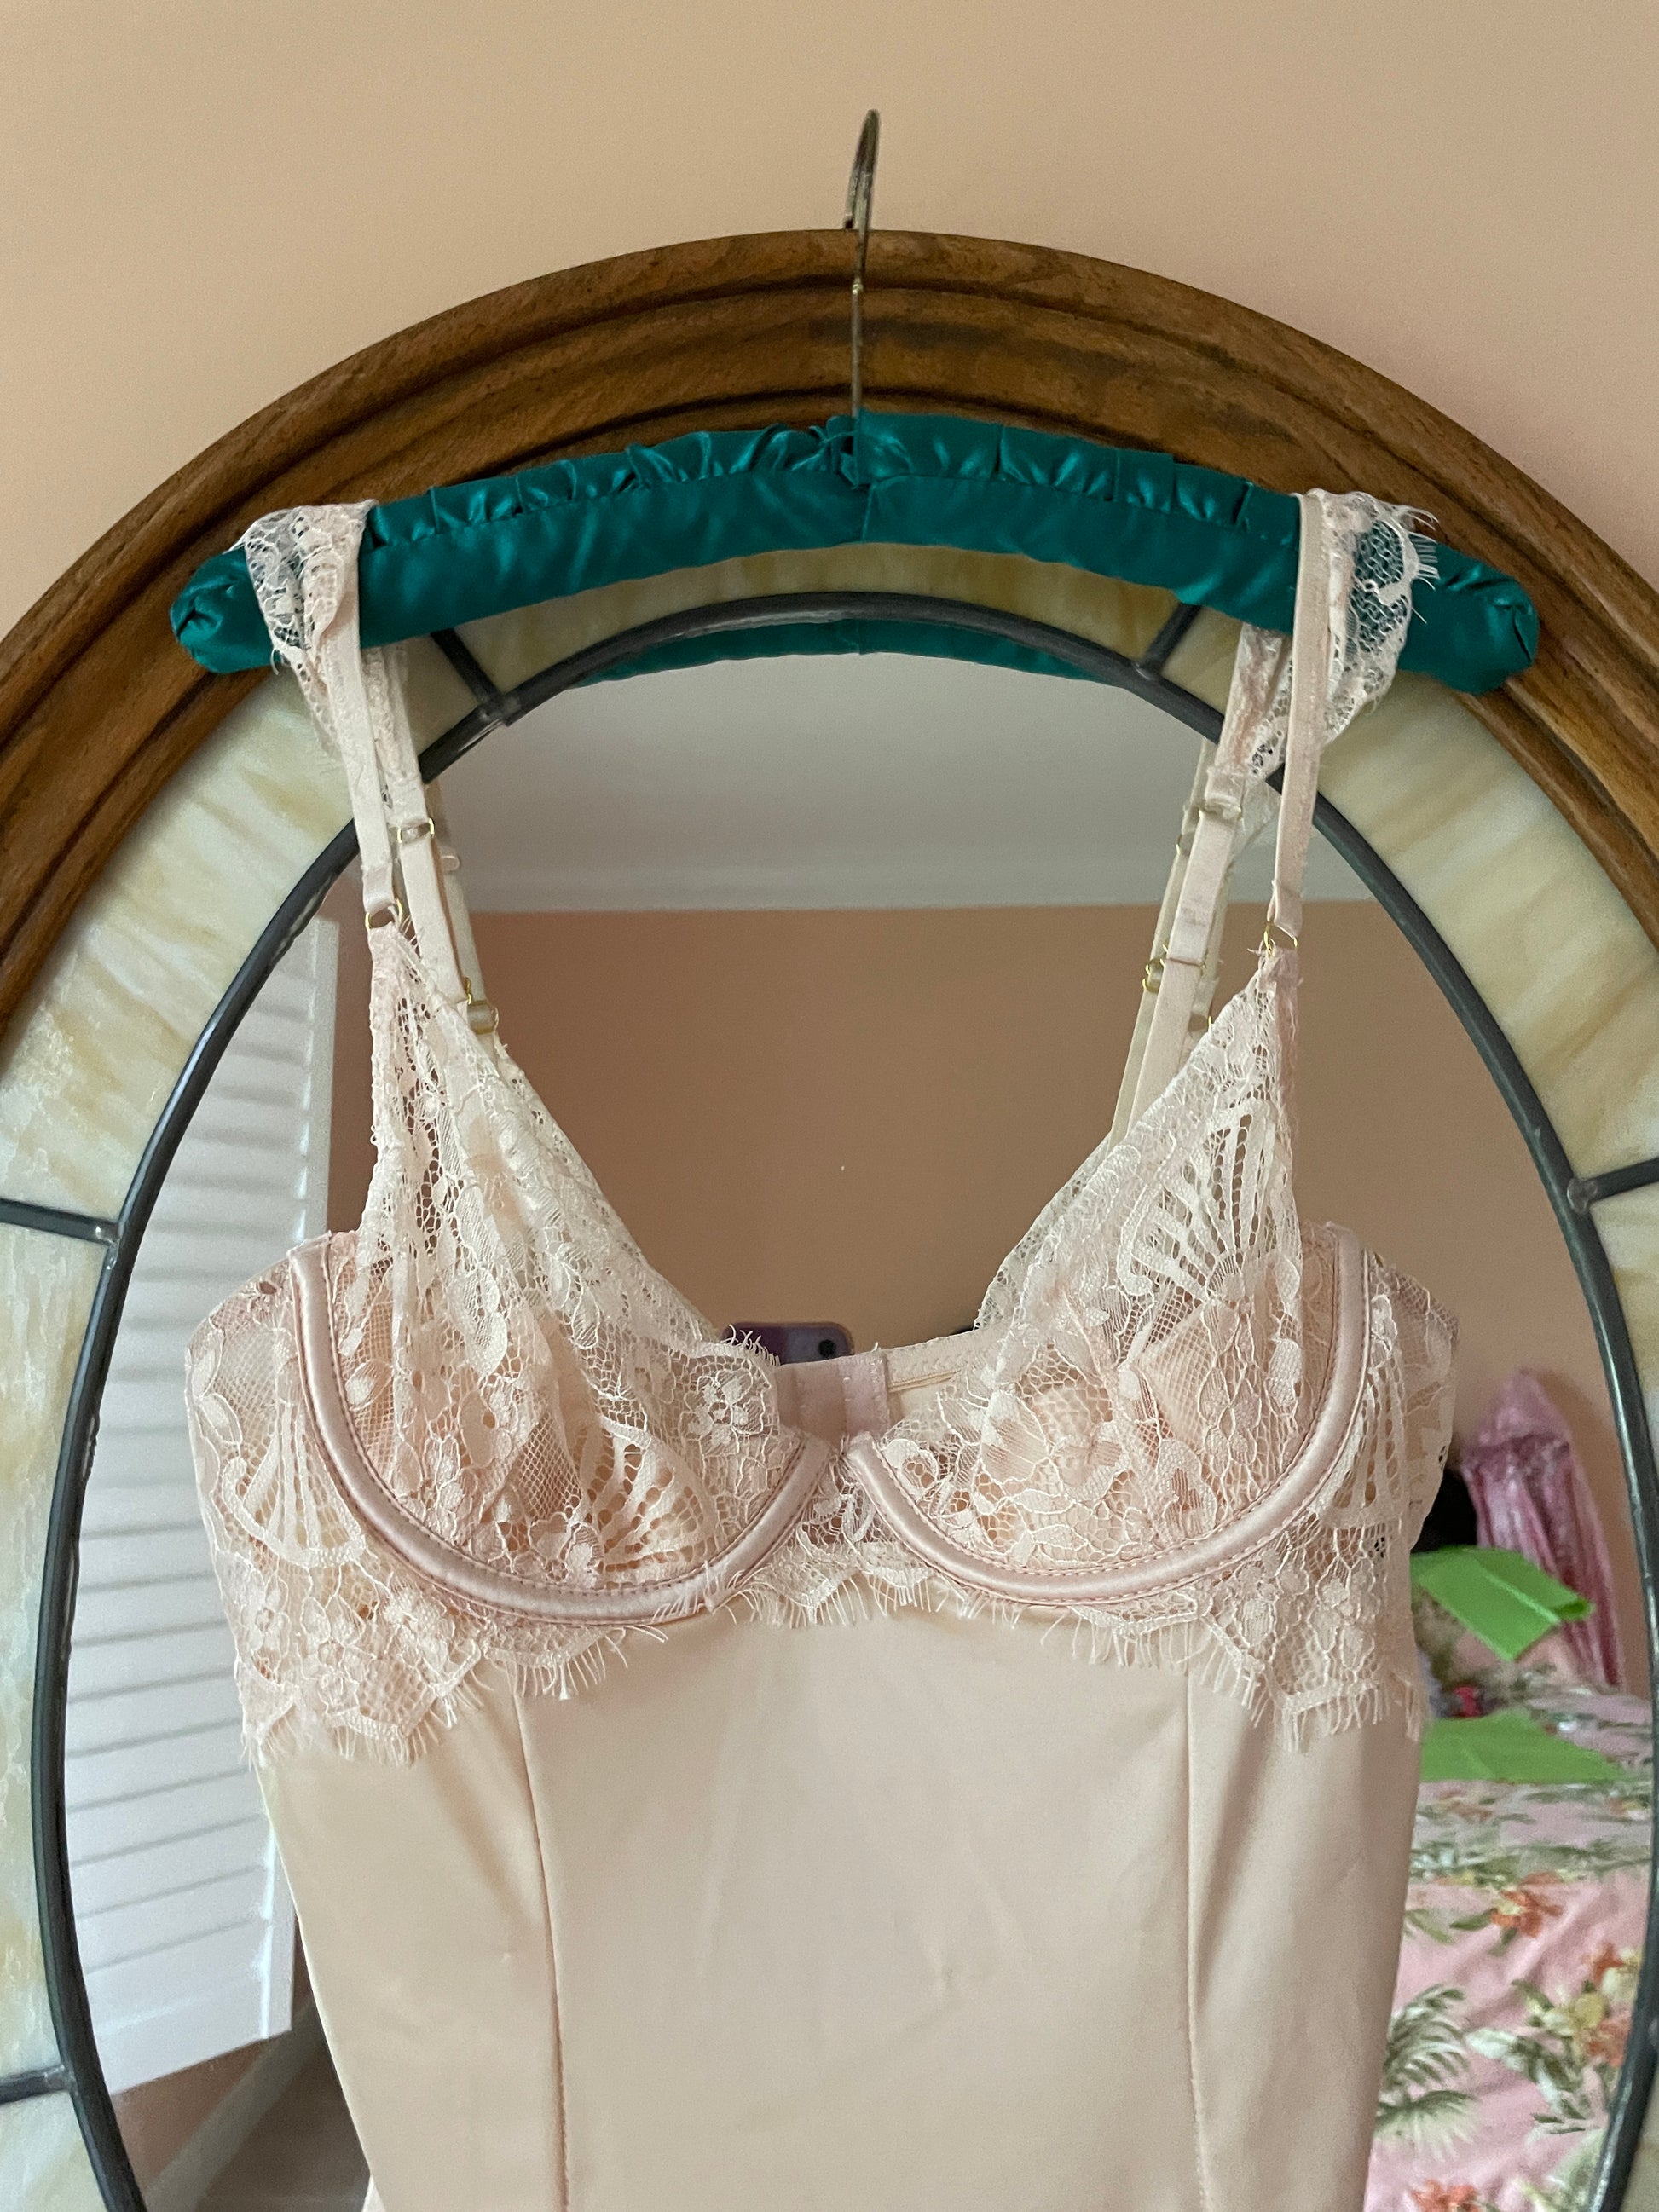  2000s Pink Lacy Lingerie Teddy